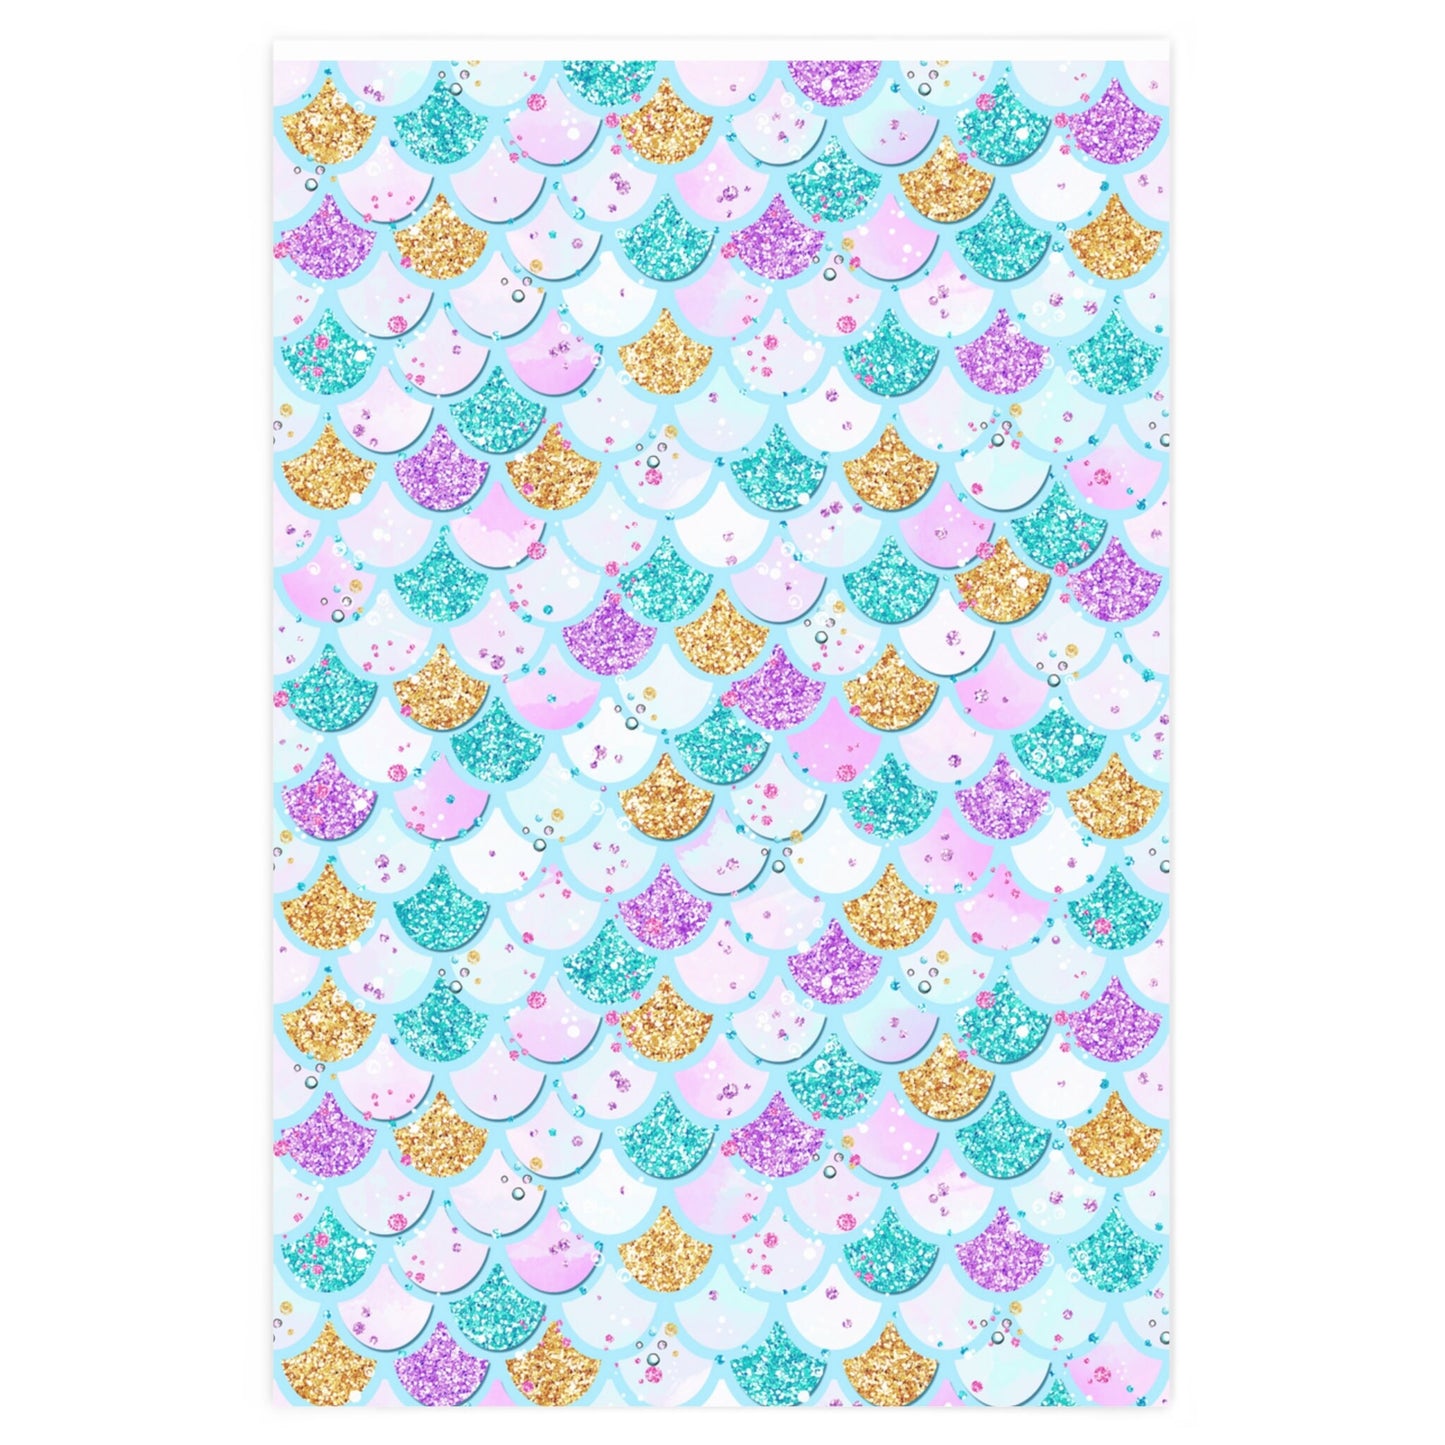 Mermaid Tail Birthday Gift Wrapping Paper, Pastel Blue Scales Pattern Paper, Baby Shower Wrap Paper, Mermaid Party Decor Christmas Gift Wrap